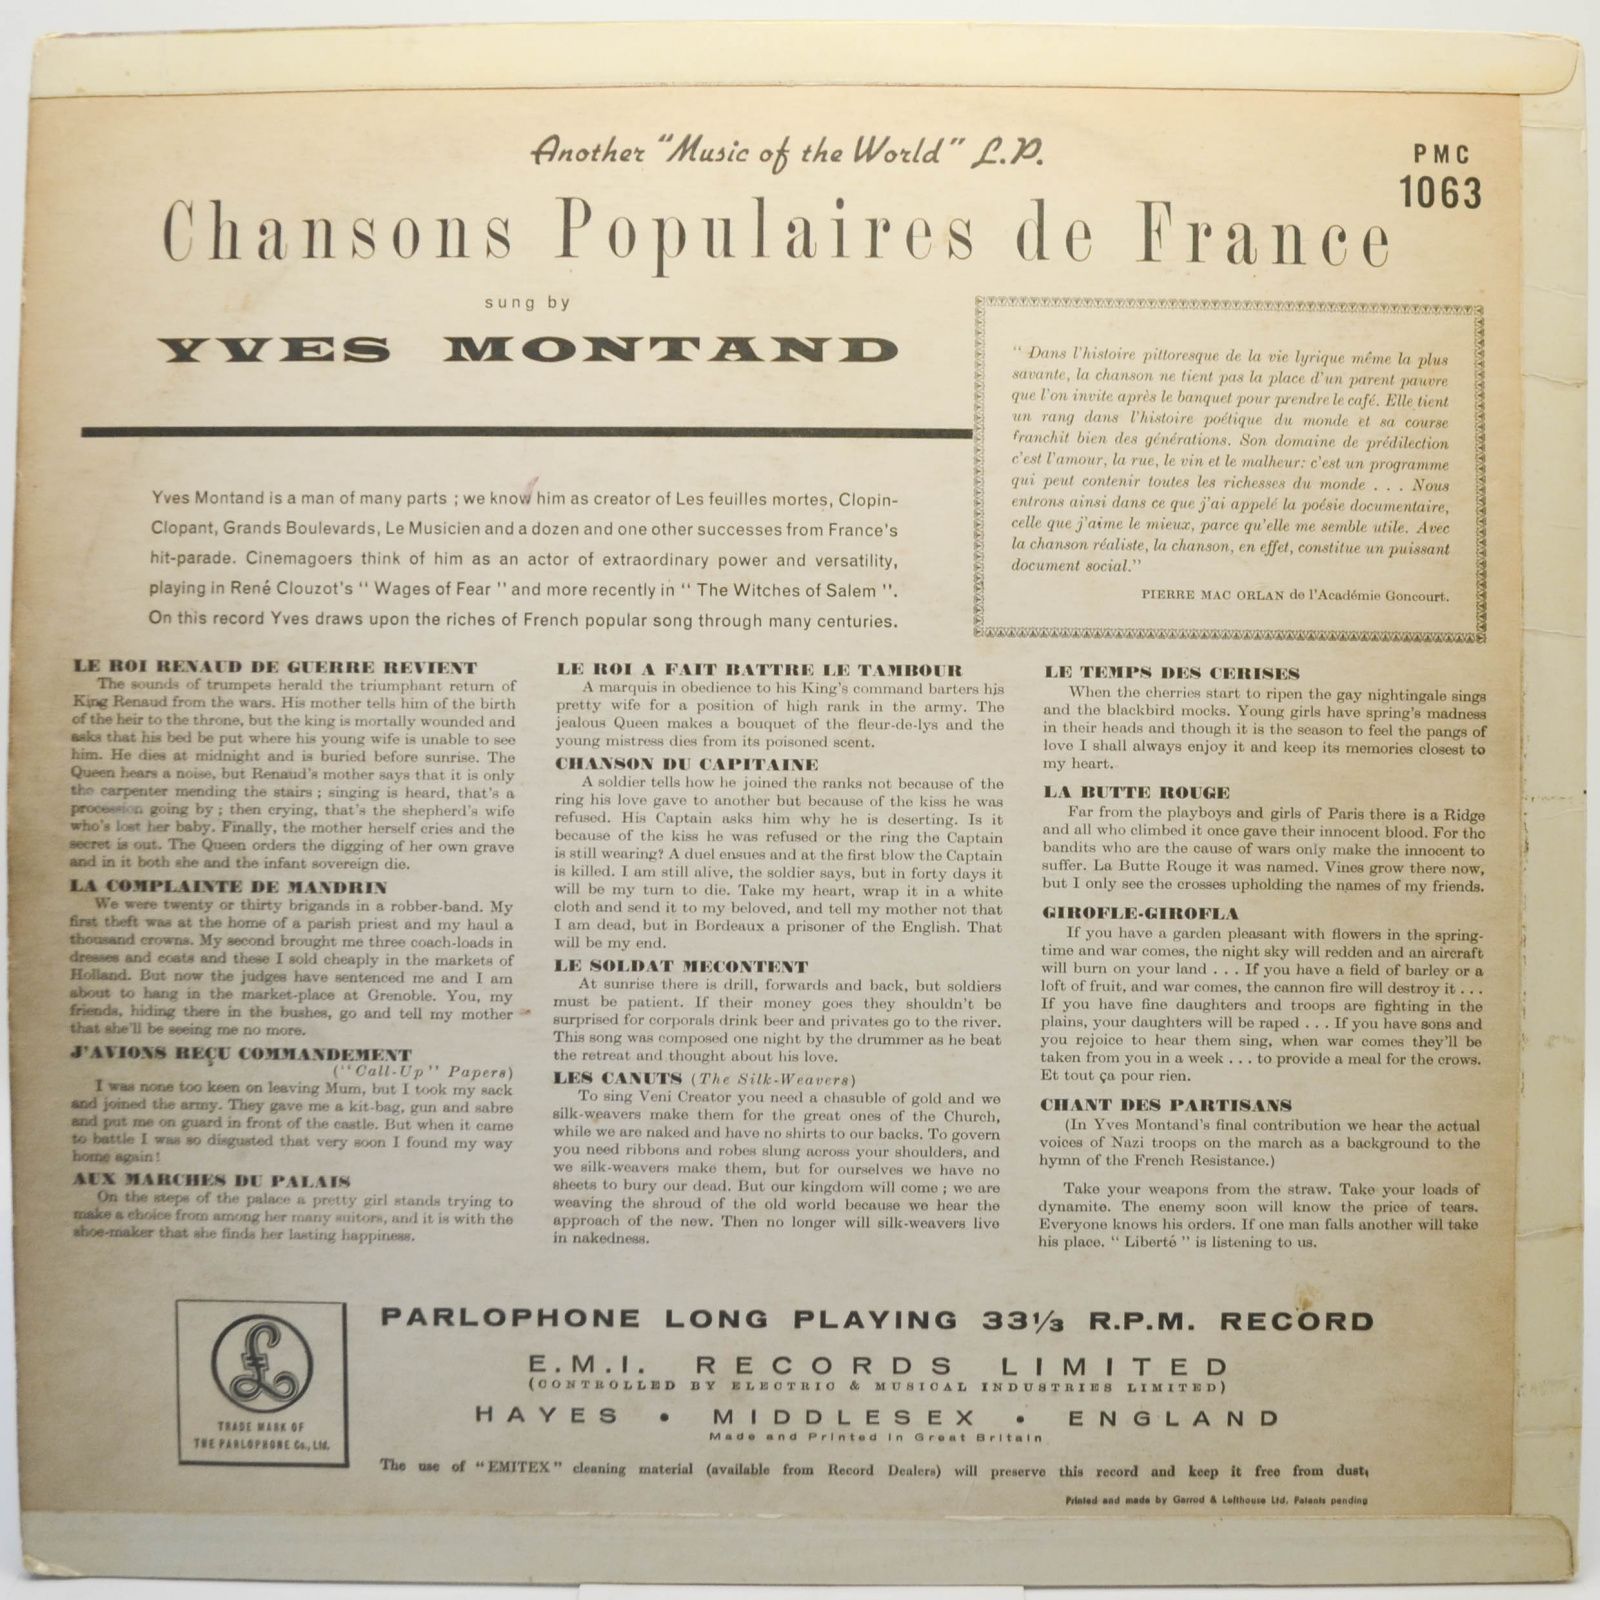 Yves Montand — Chansons Populaires De France (UK), 1955